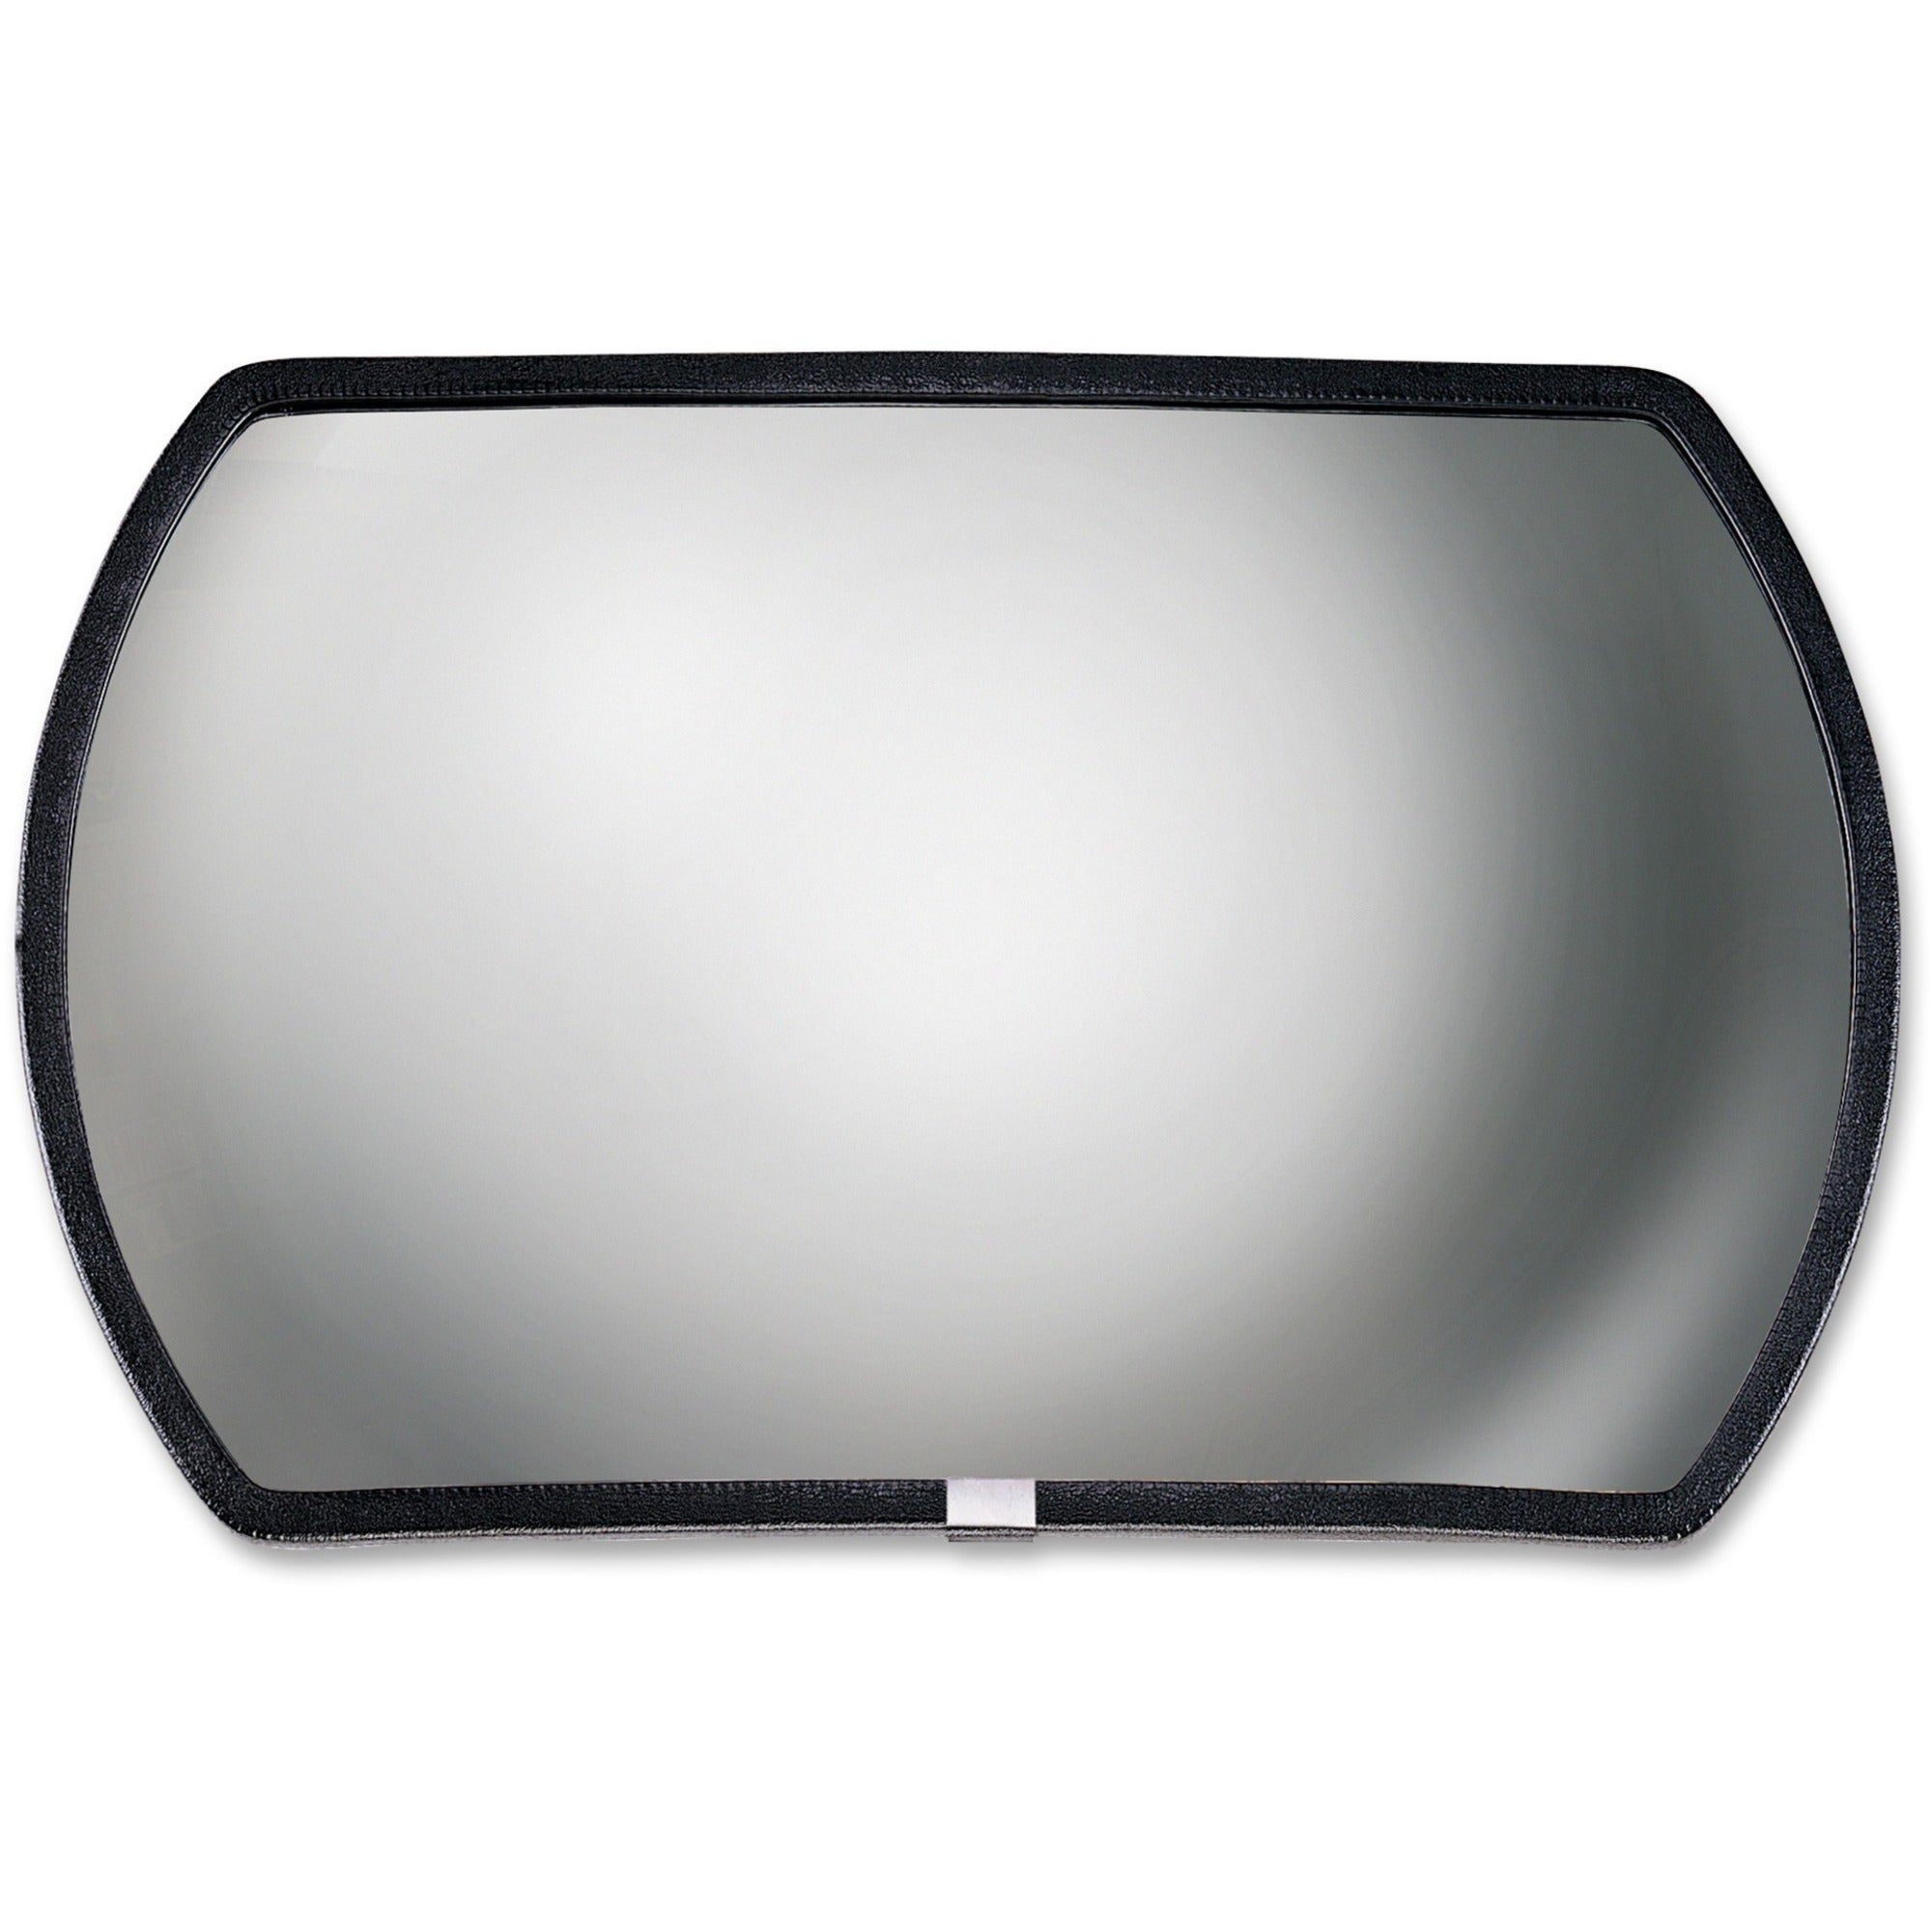 See All Rounded Rectangular Convex Mirrors - Rounded Rectangular - 15" Width x 24" Length - 1 Each - 